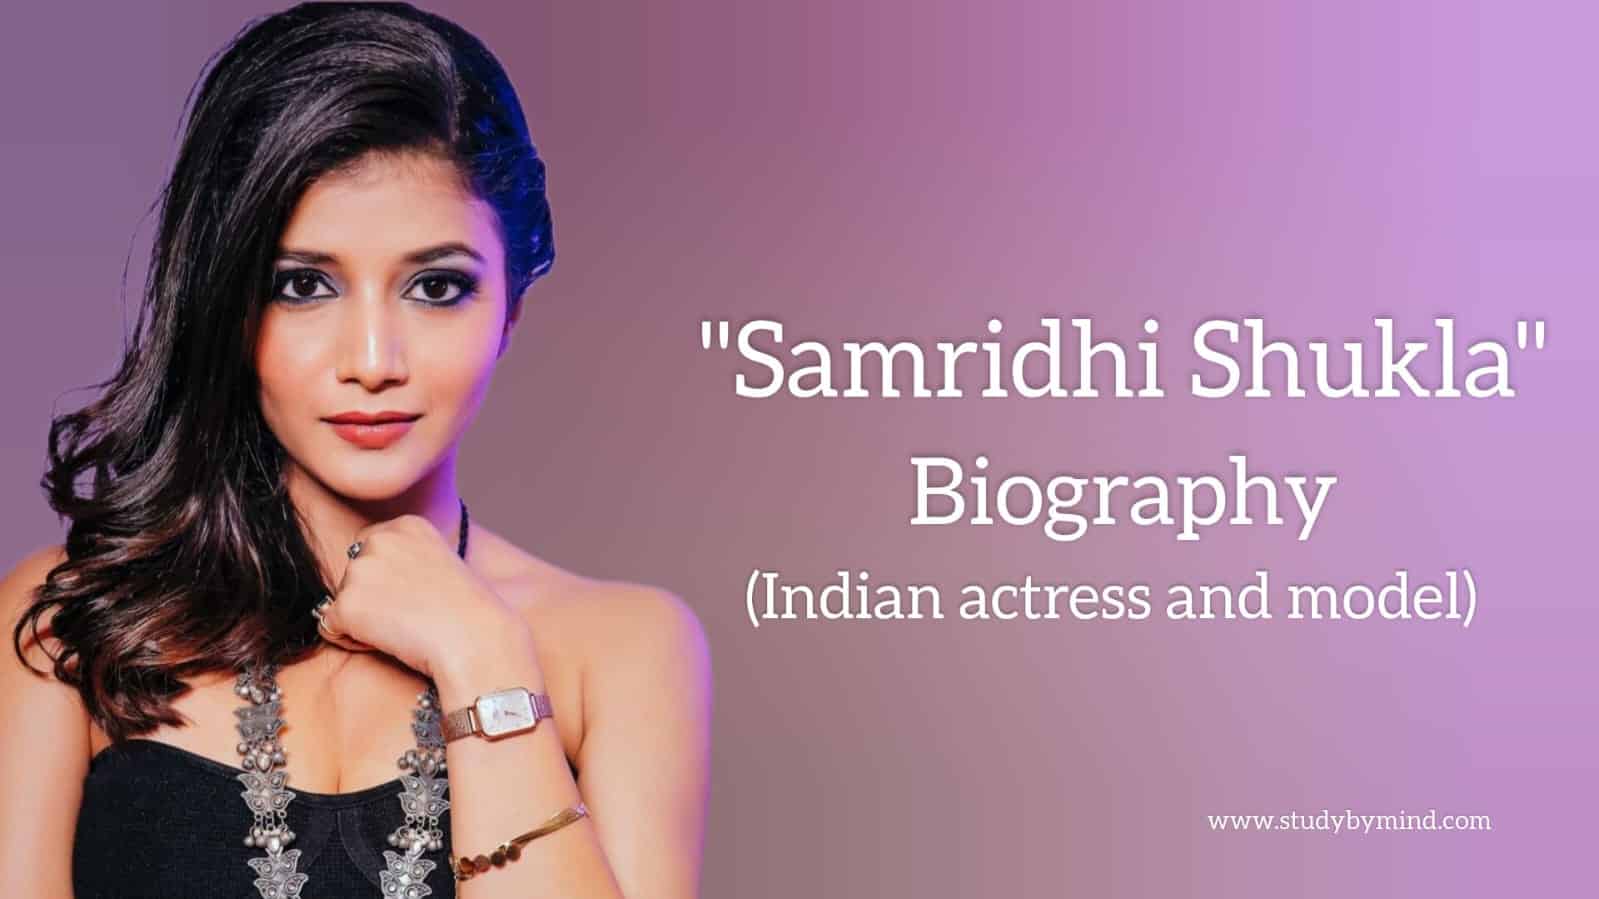 You are currently viewing Samridhi shukla biography in english (Actress)